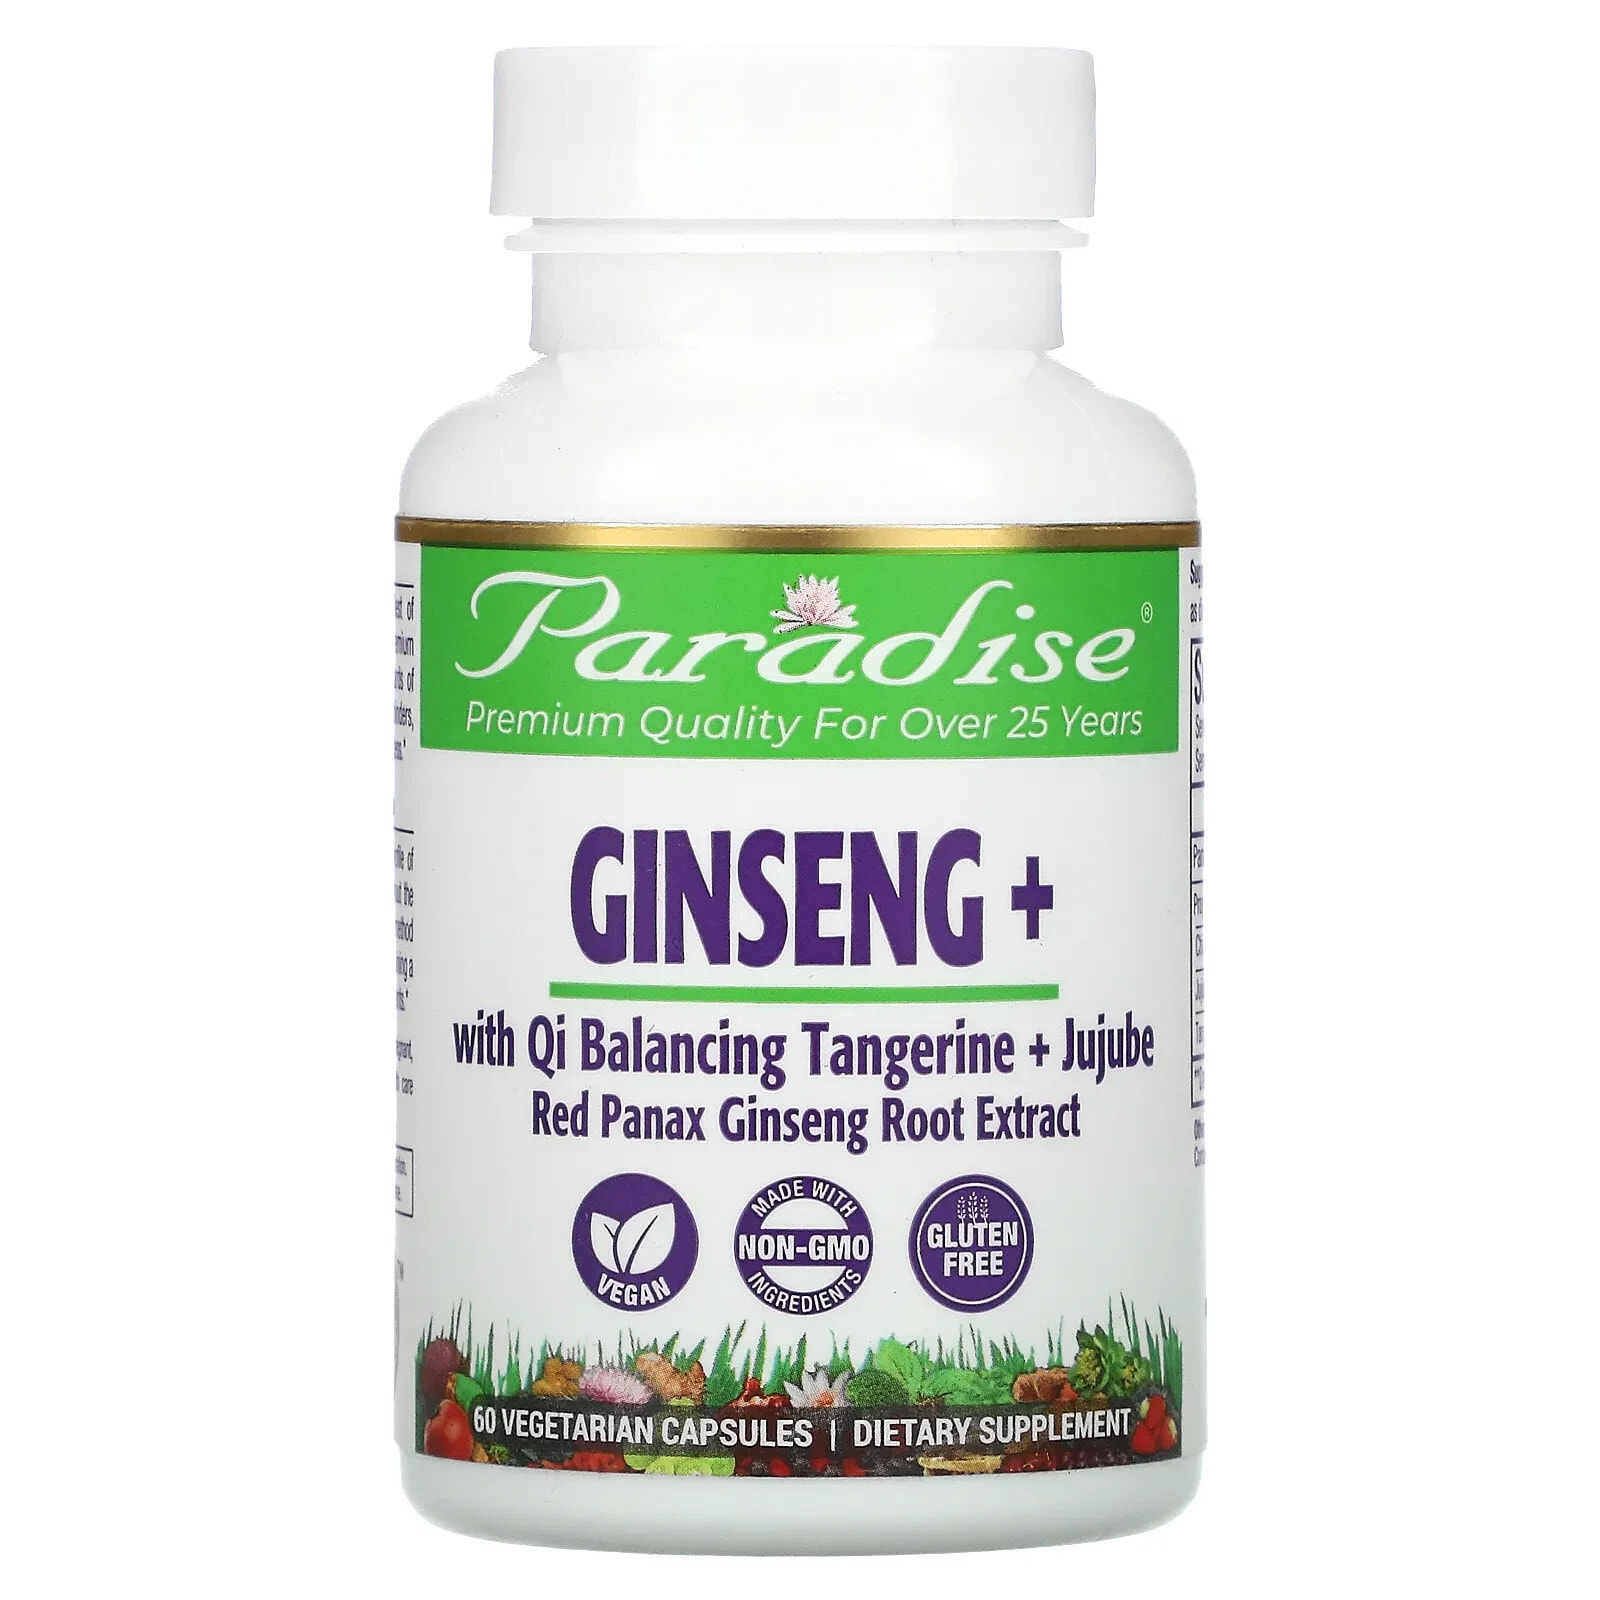 Ginseng+ Extract, 60 Vegetarian Capsules